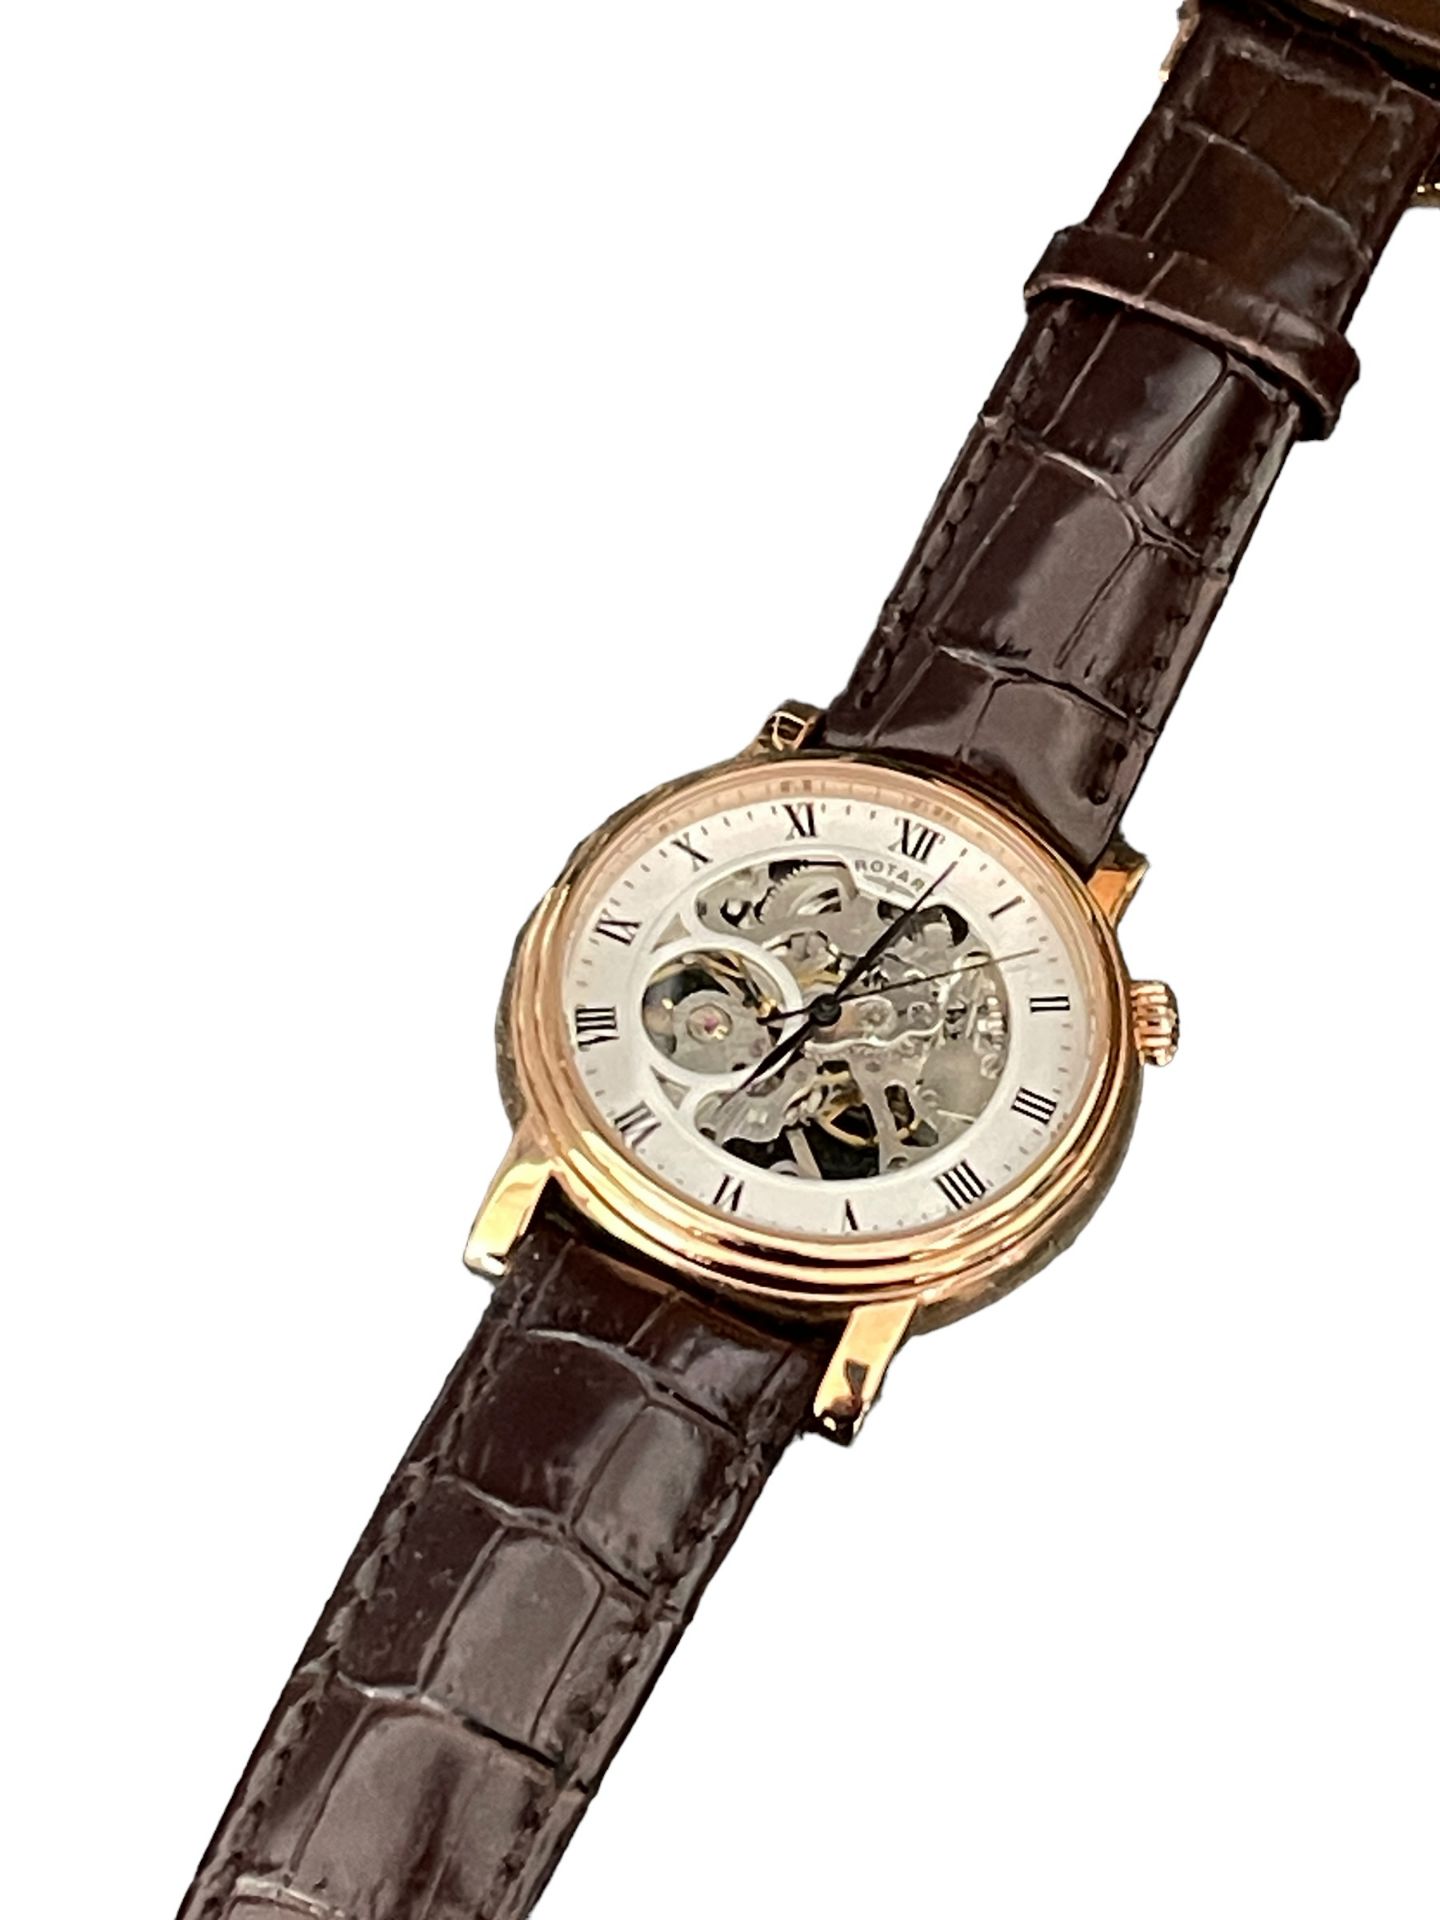 Rotary Skeleton watch mechanical gold plated working - Image 3 of 3